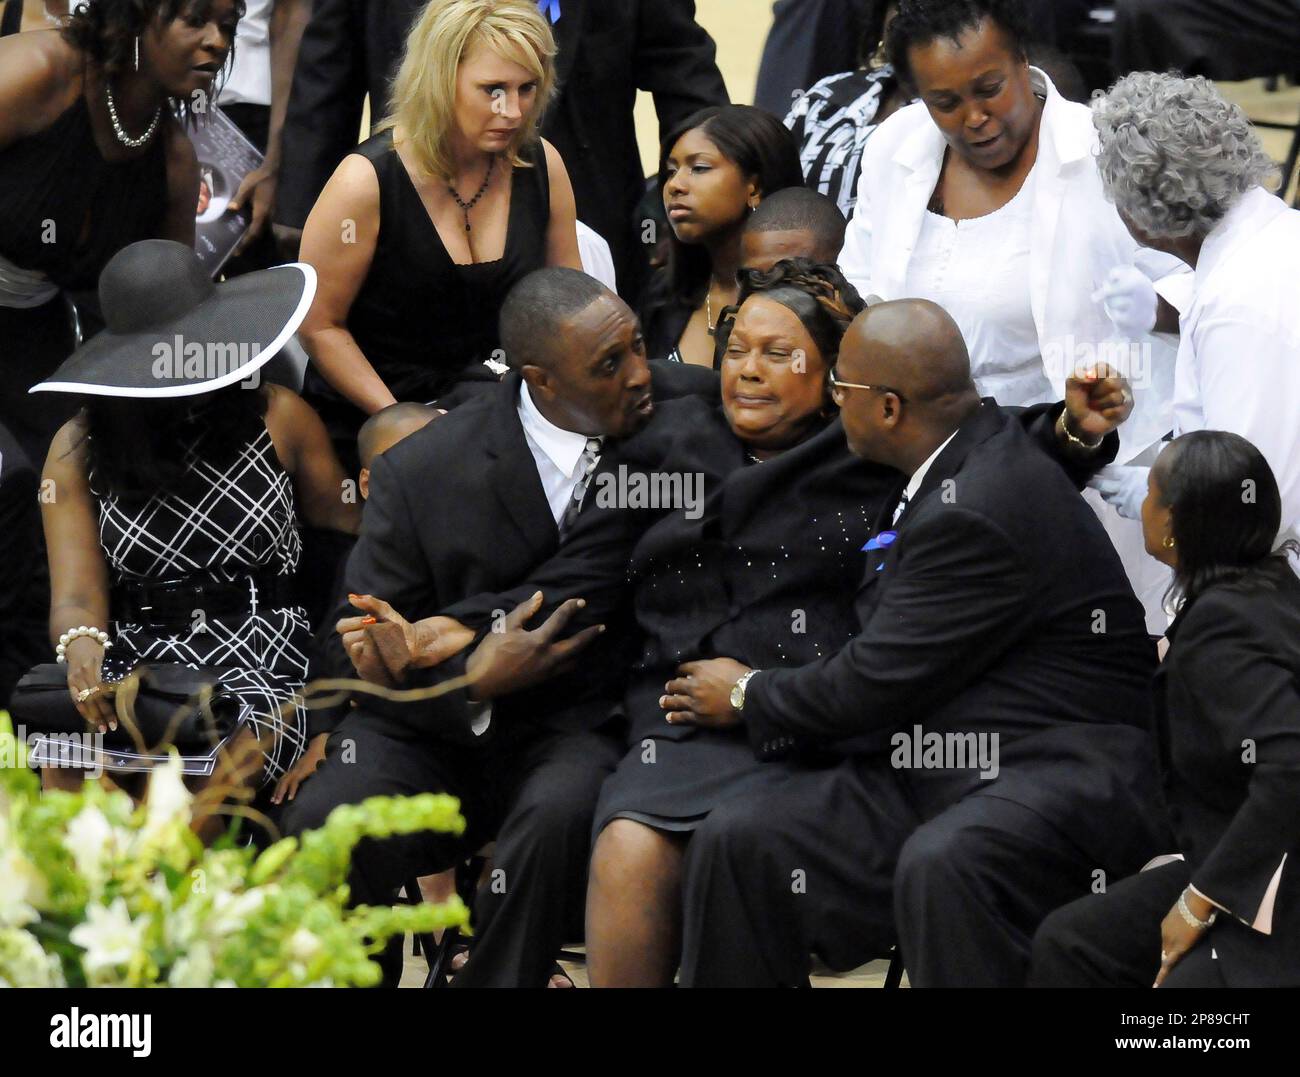 Lucille McNair, seated center, mother of Steve McNair, is consoled by family  and friends during the funeral service for Steve McNair in Hattiesburg,  Miss., Saturday, July 11, 2009. McNair, a former NFL